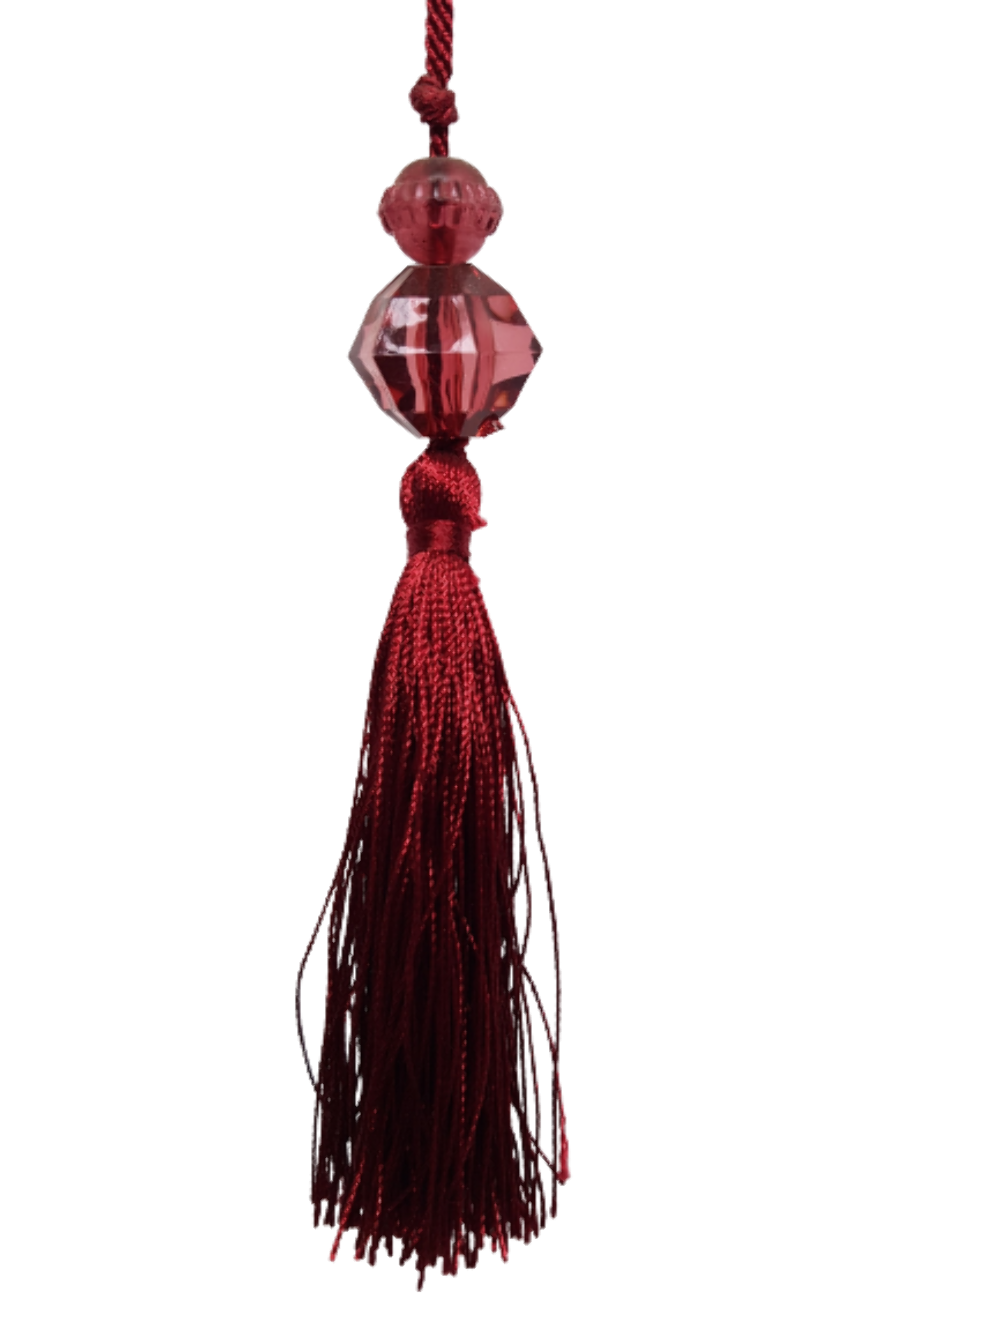 Small Tassel with Bead - Red Wine - Brand New - Decorative Tassel for Antique Key or Door SmRW